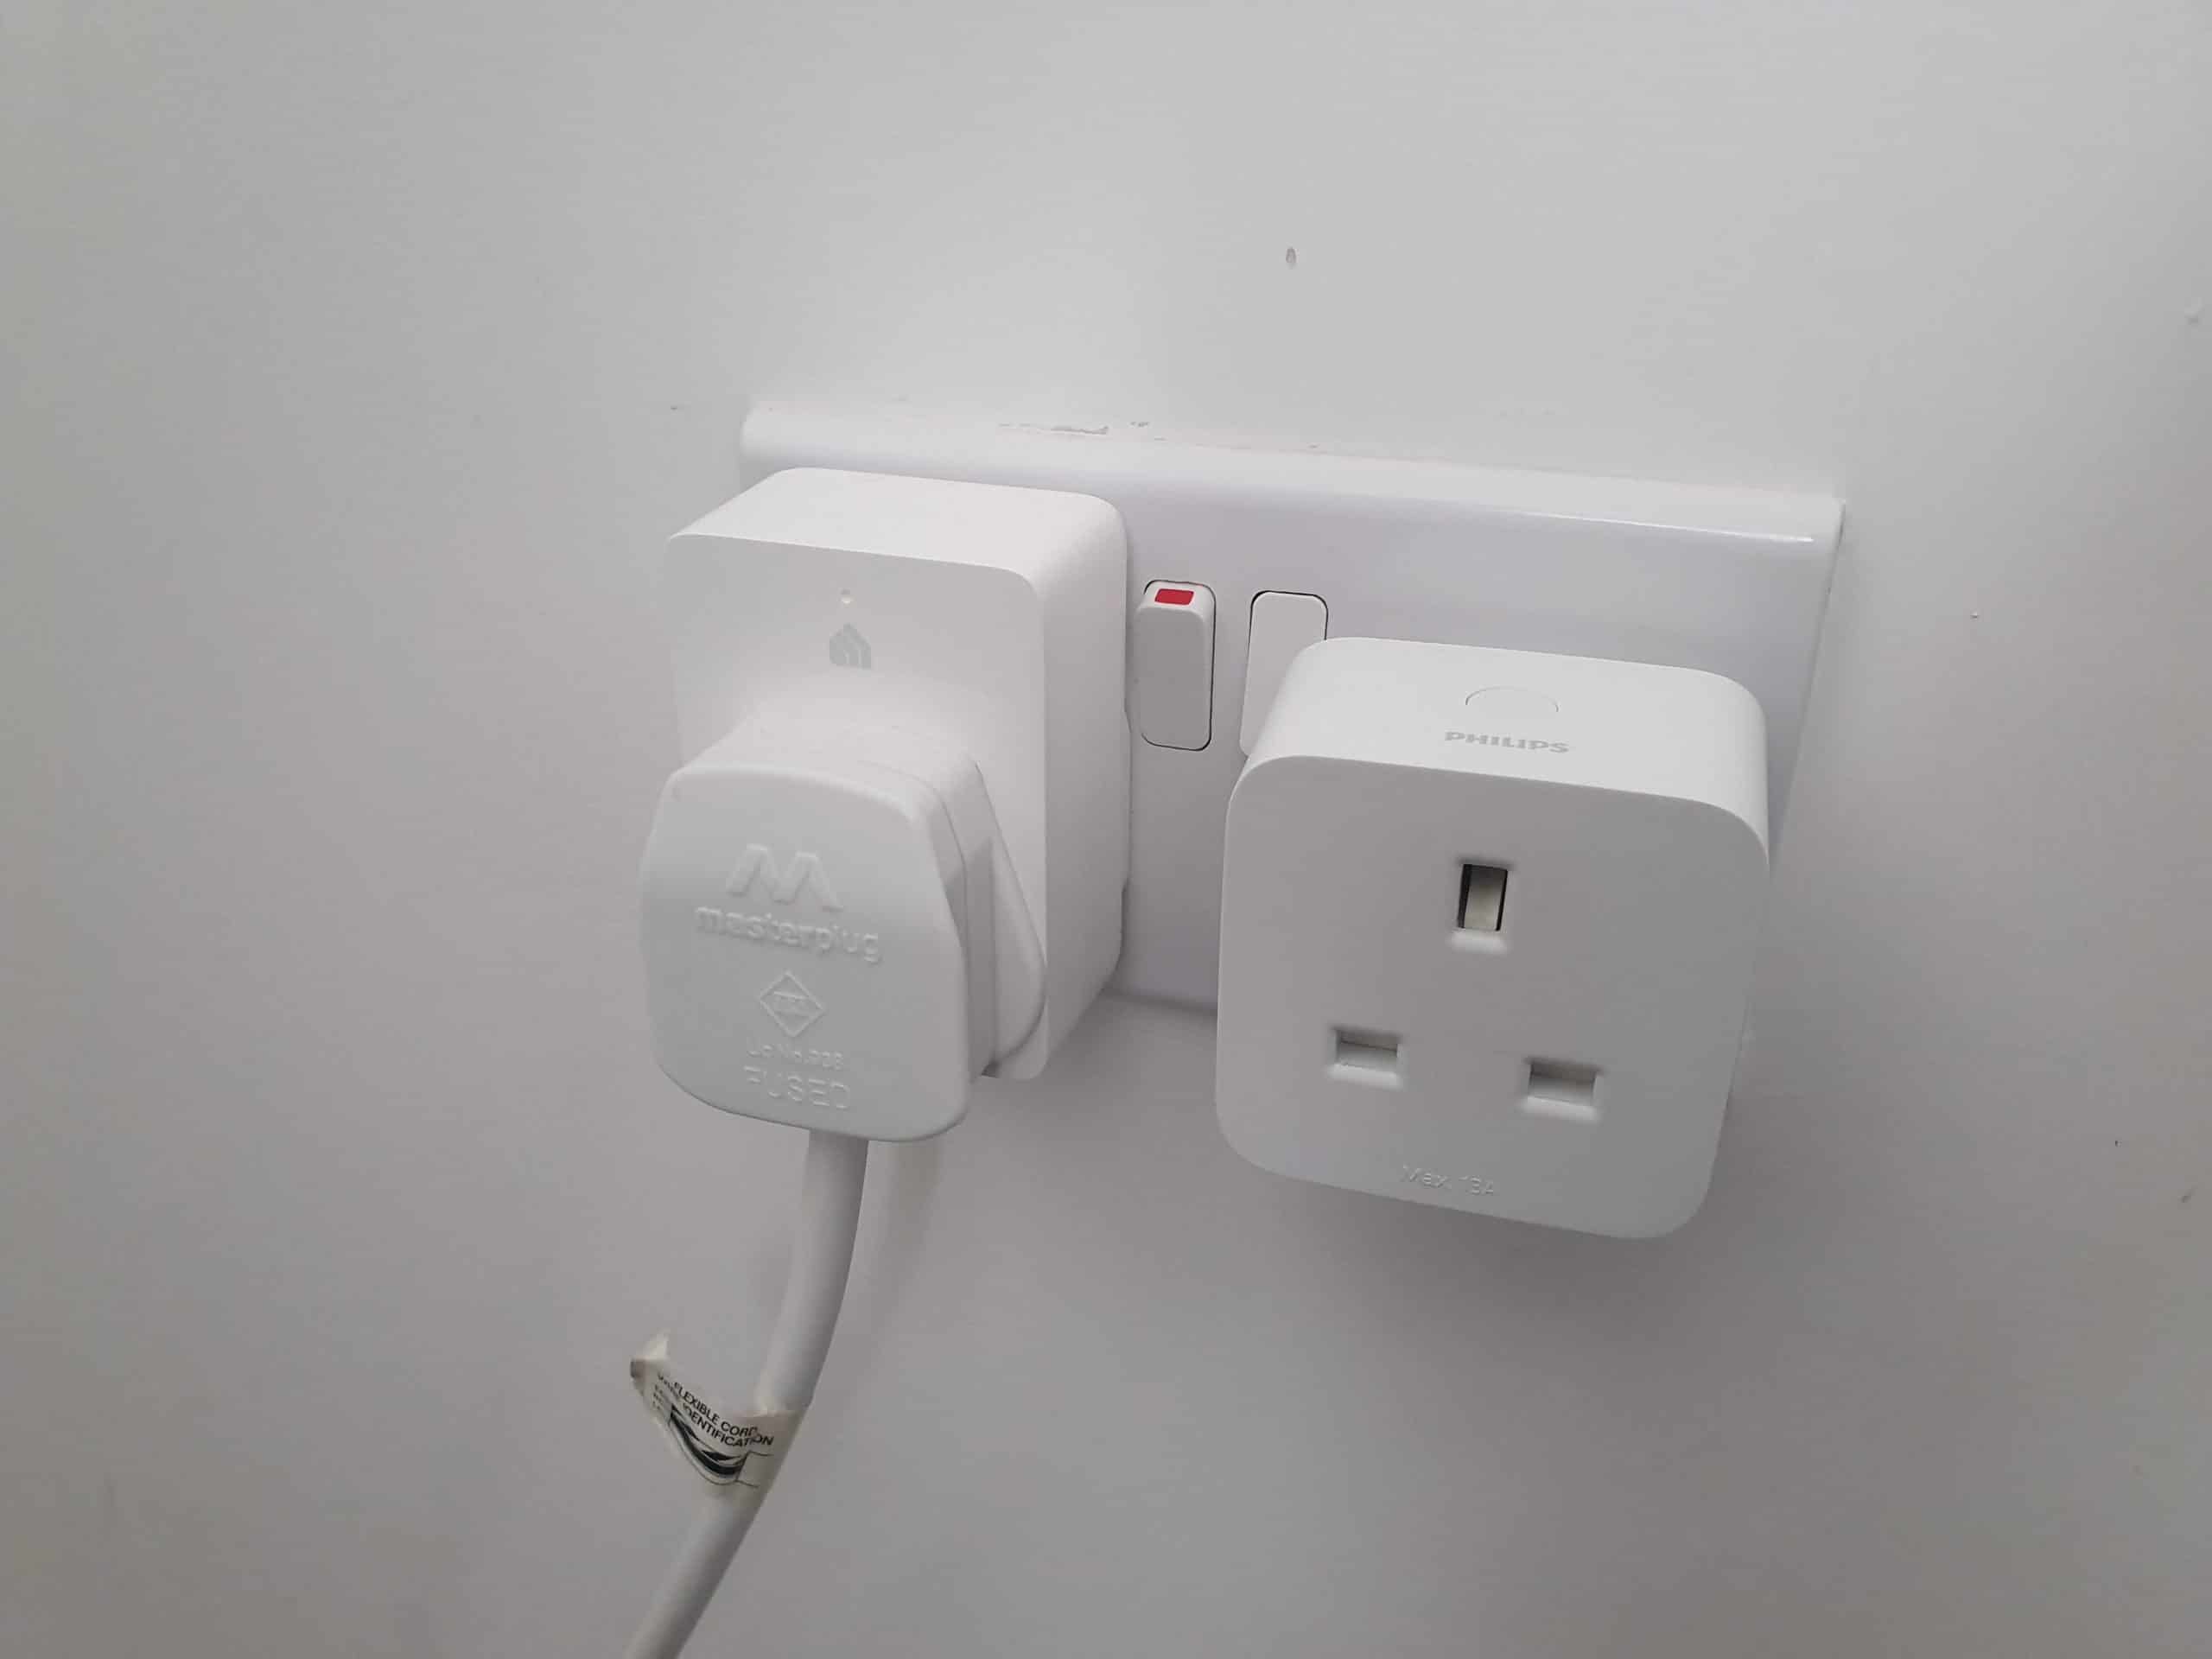 Smart Plugs With 5-GHz Wi-Fi Support (Is This Really Needed